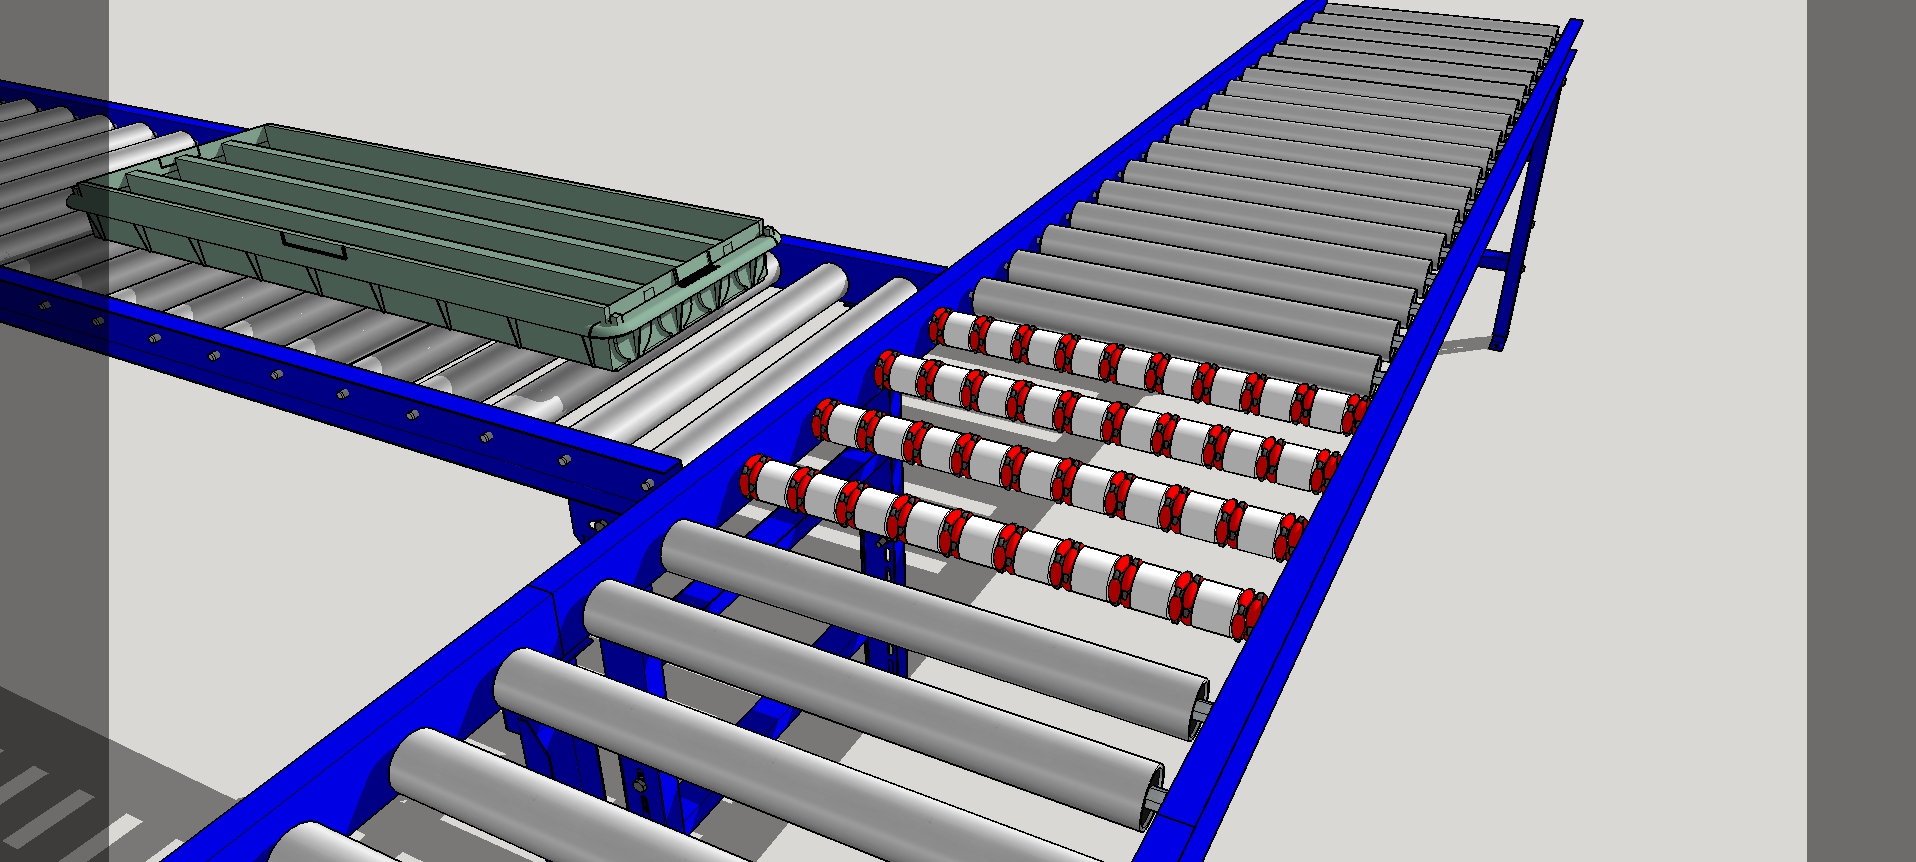 Roller racking setup with omni wheel roller inserts